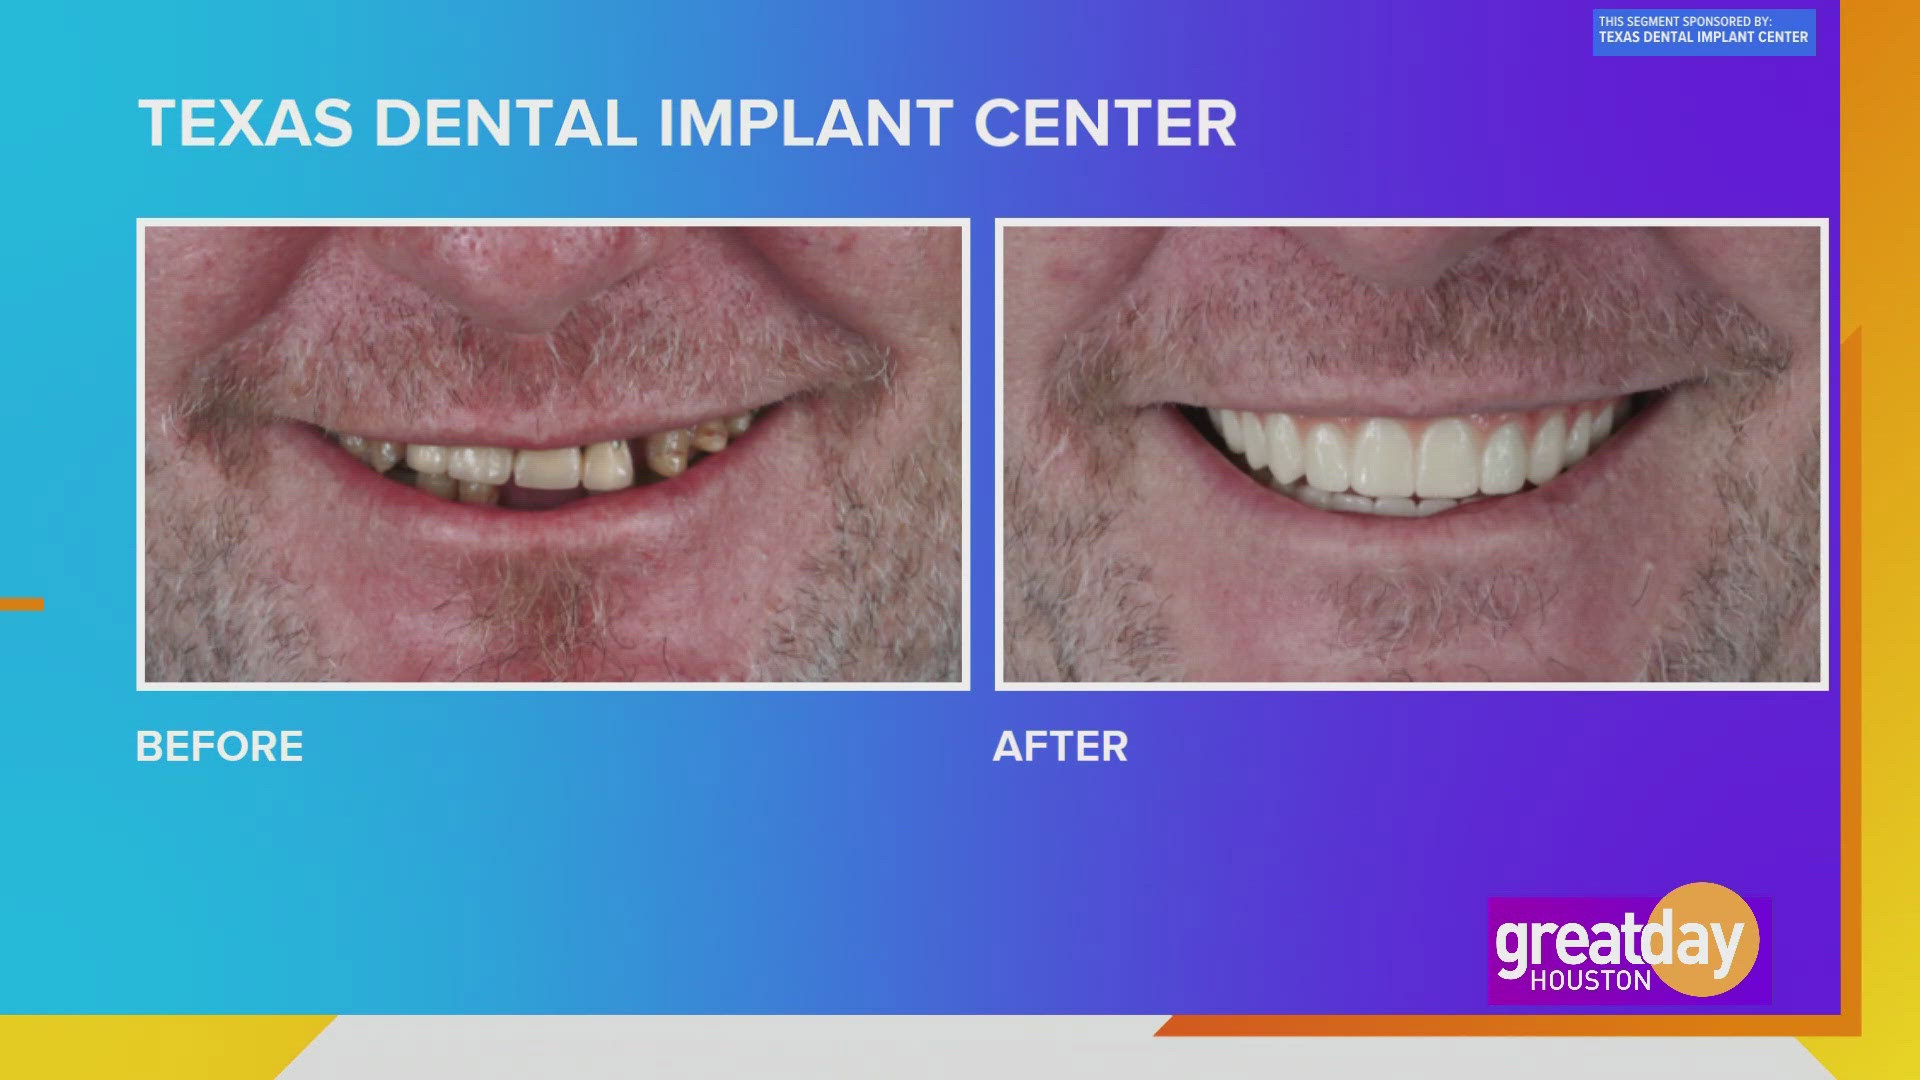 Let the Texas Dental Implant Center can give you the smile and confidence of your dreams.